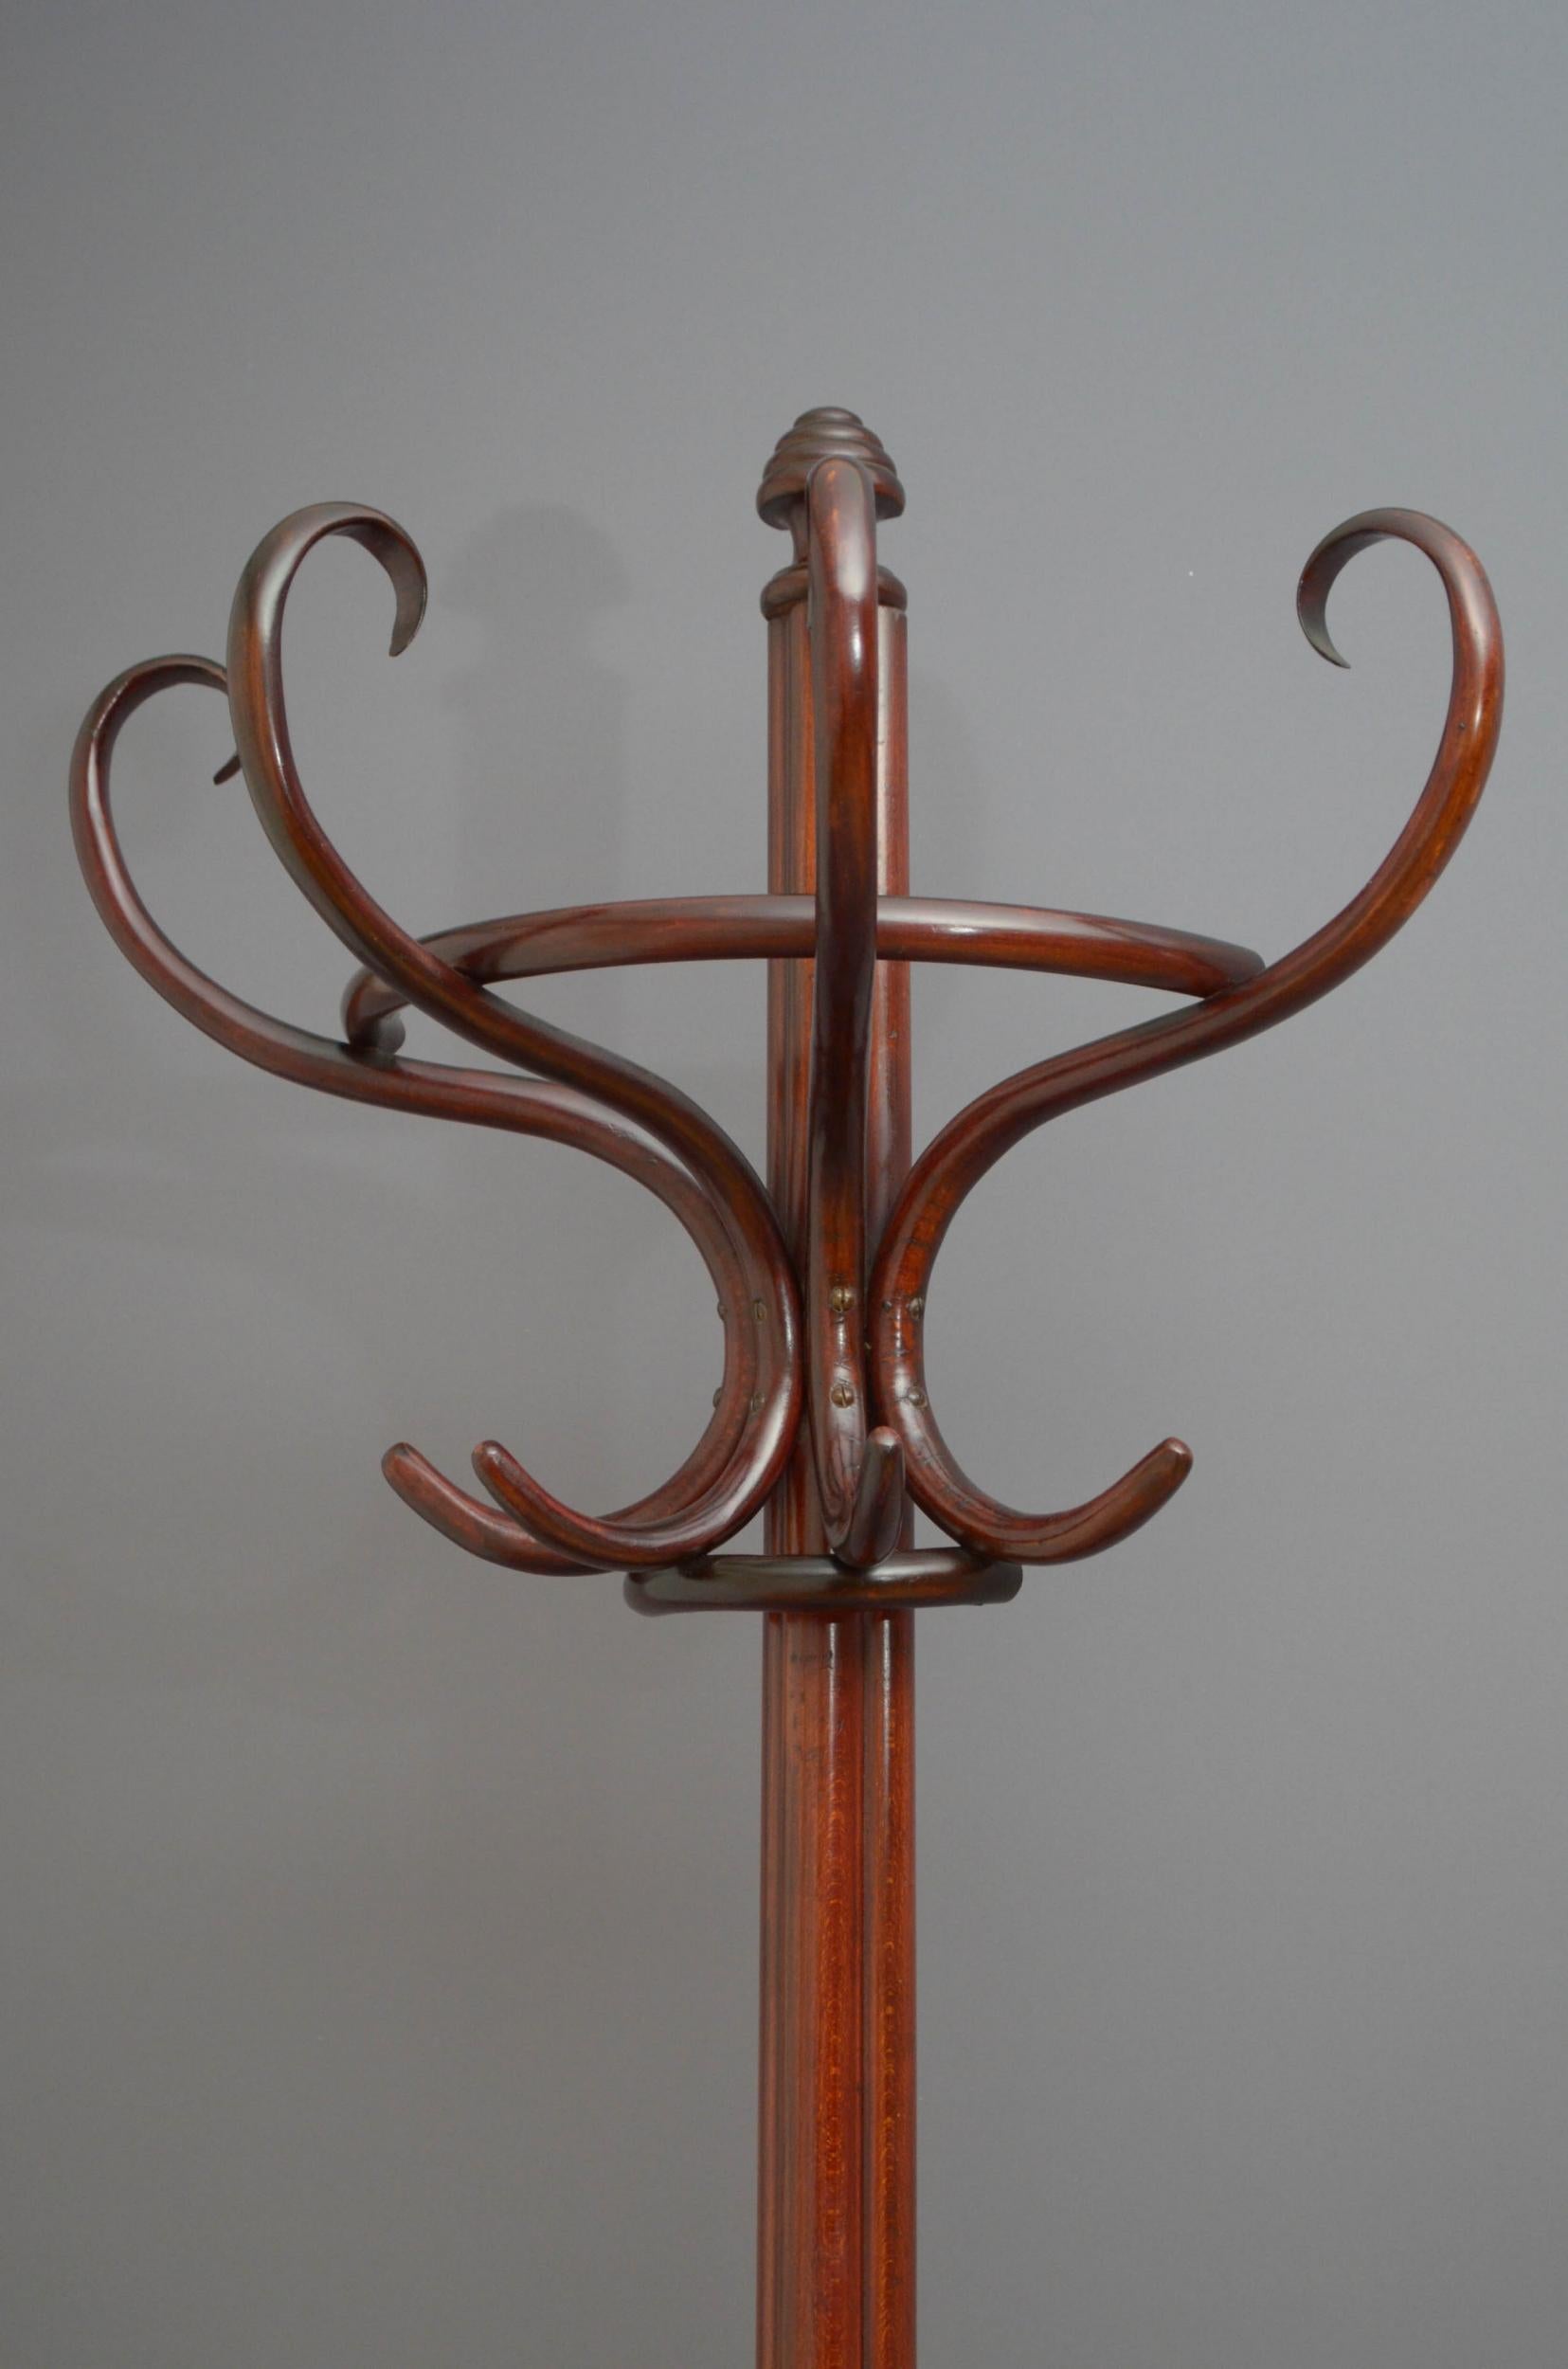 Sn5077 A half round bentwood hat stand, having four coat hooks and four bentwood scrolls for hats, surmounted by a beehive finial, supported on cluster column terminating in three downswept legs with a ring for sticks and umbrellas. All in fantastic